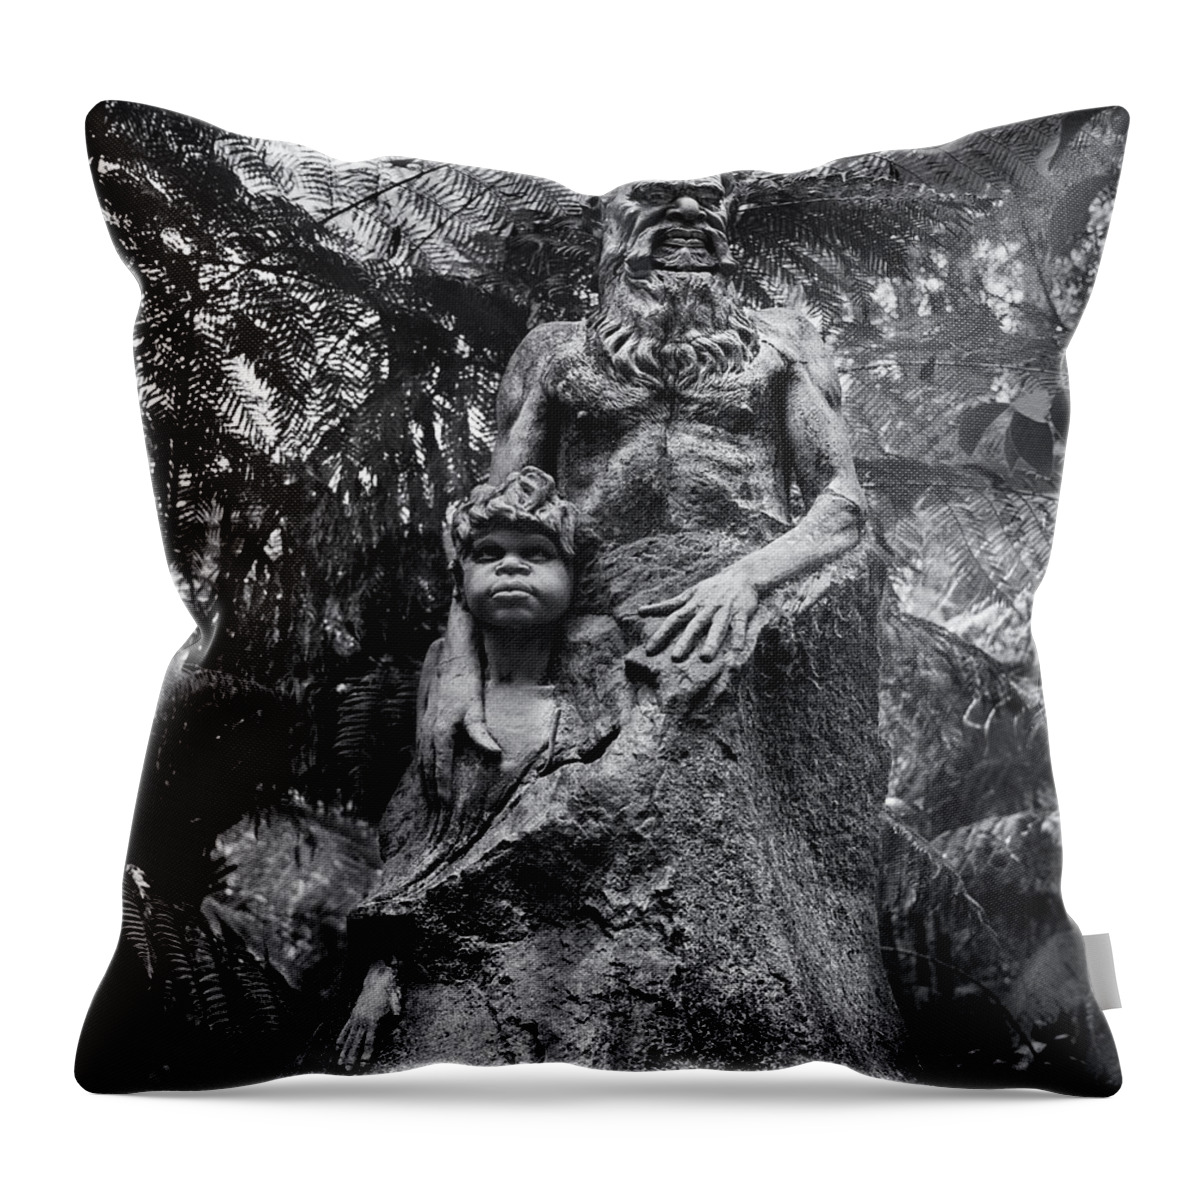 Aboriginal Sculpture Throw Pillow featuring the sculpture William Rickett's Aboriginal sculpture - Black and white photo #10 by Paul E Williams